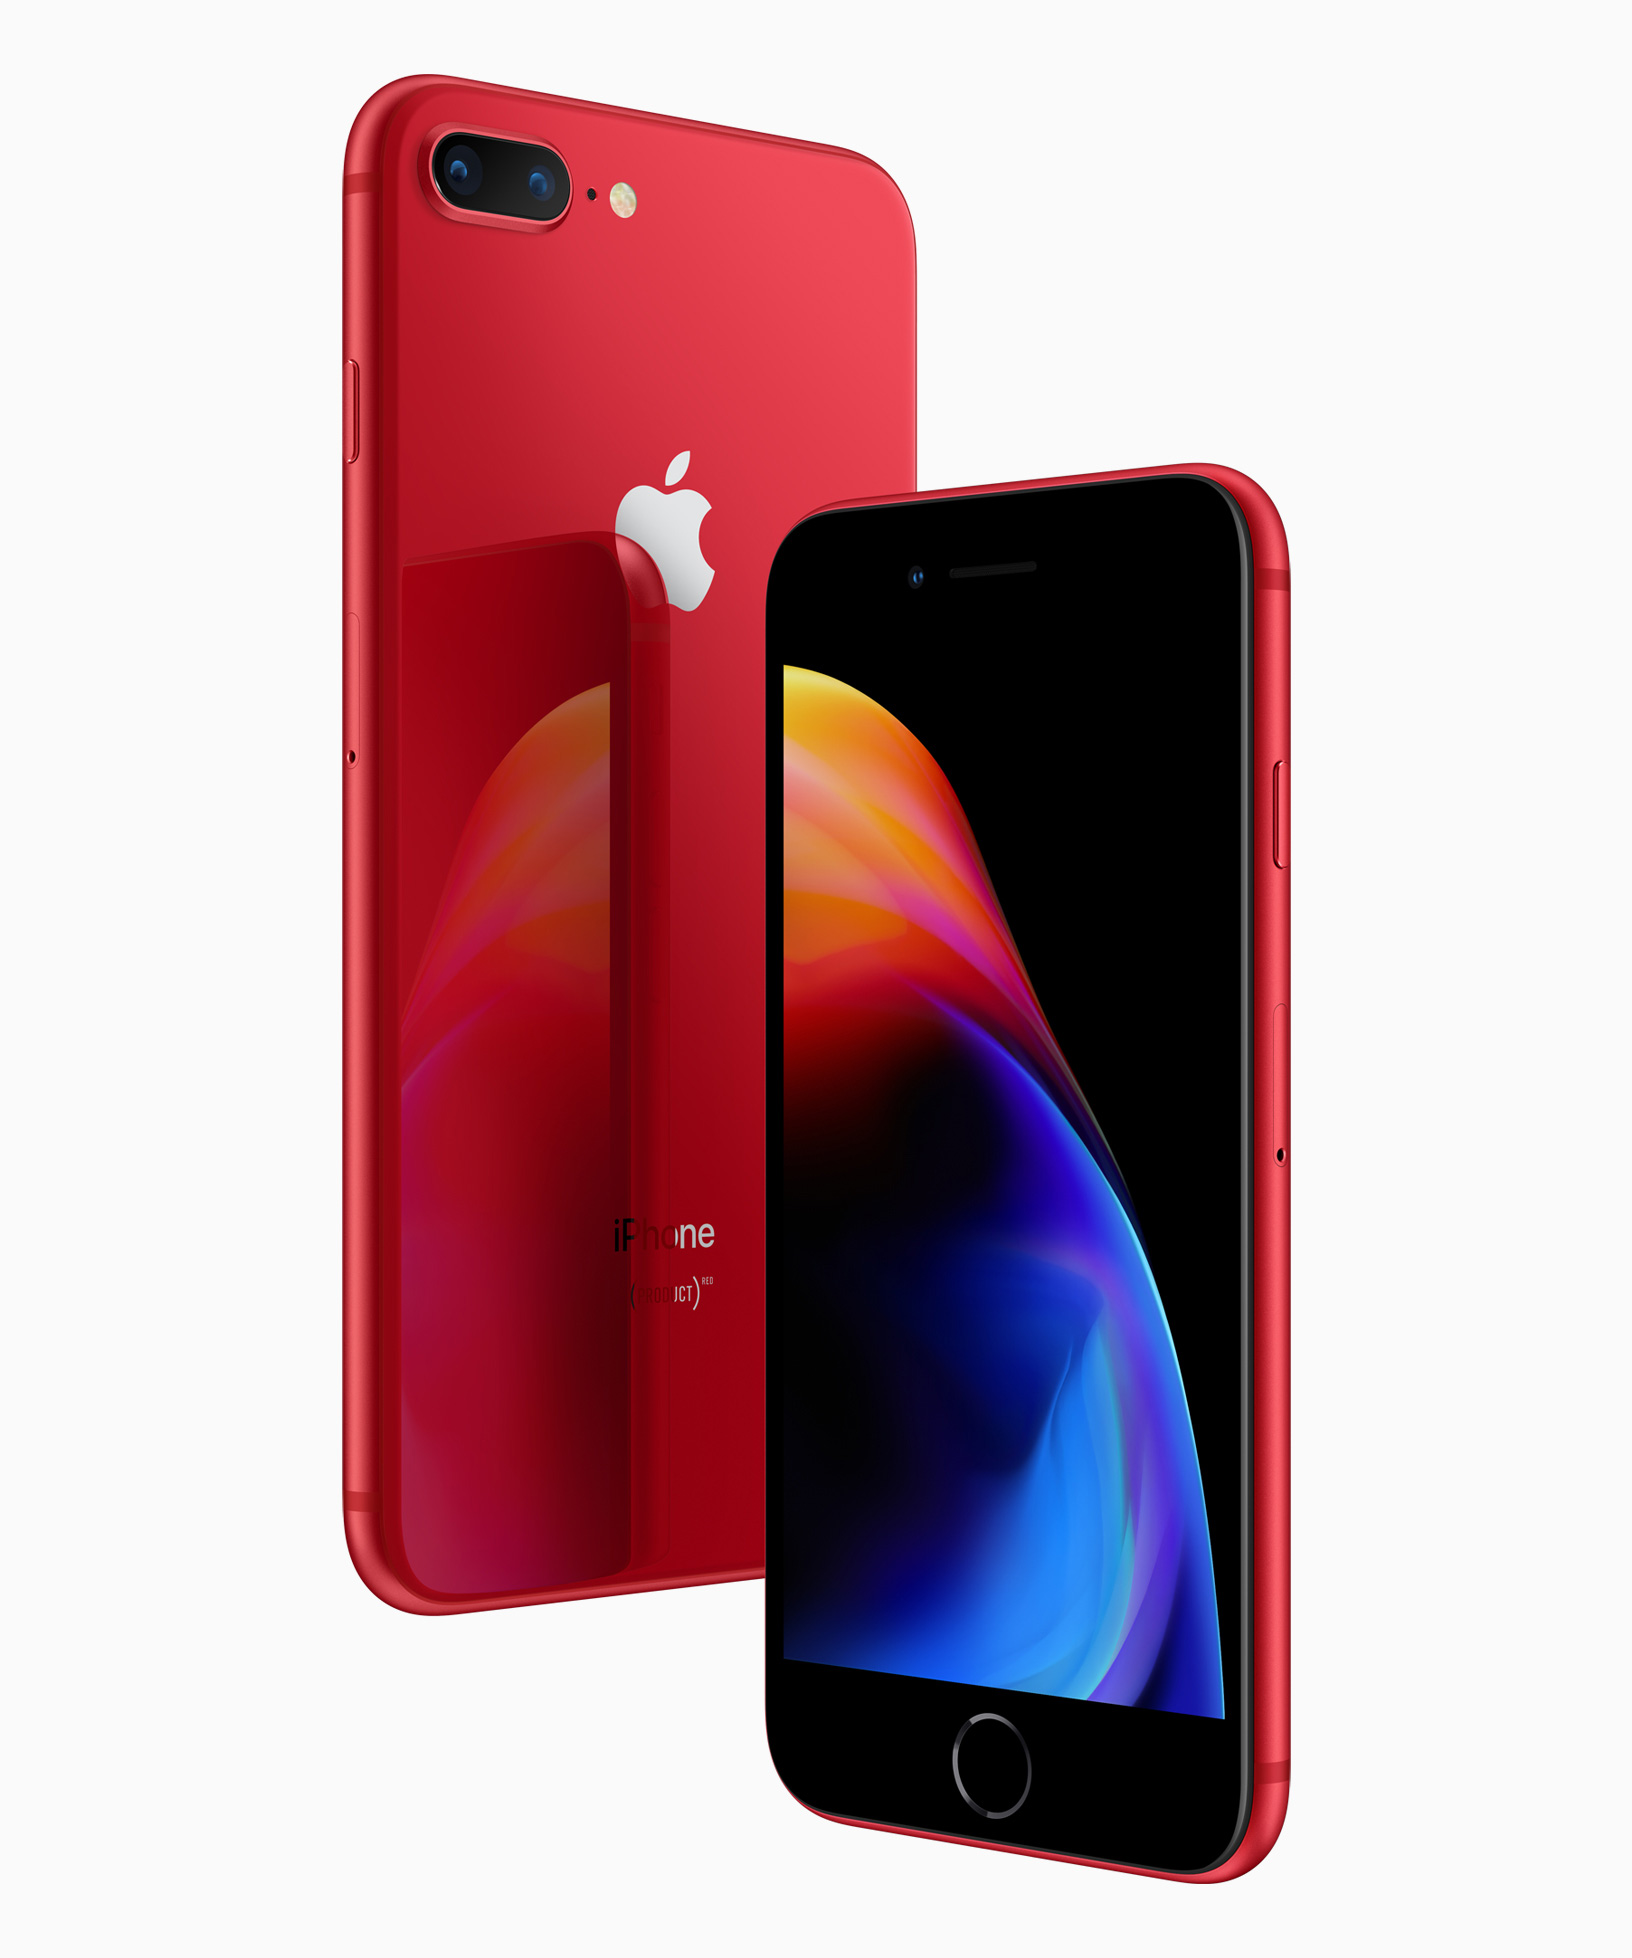 Apple launches iPhone 8 and 8 Plus (PRODUCT) RED